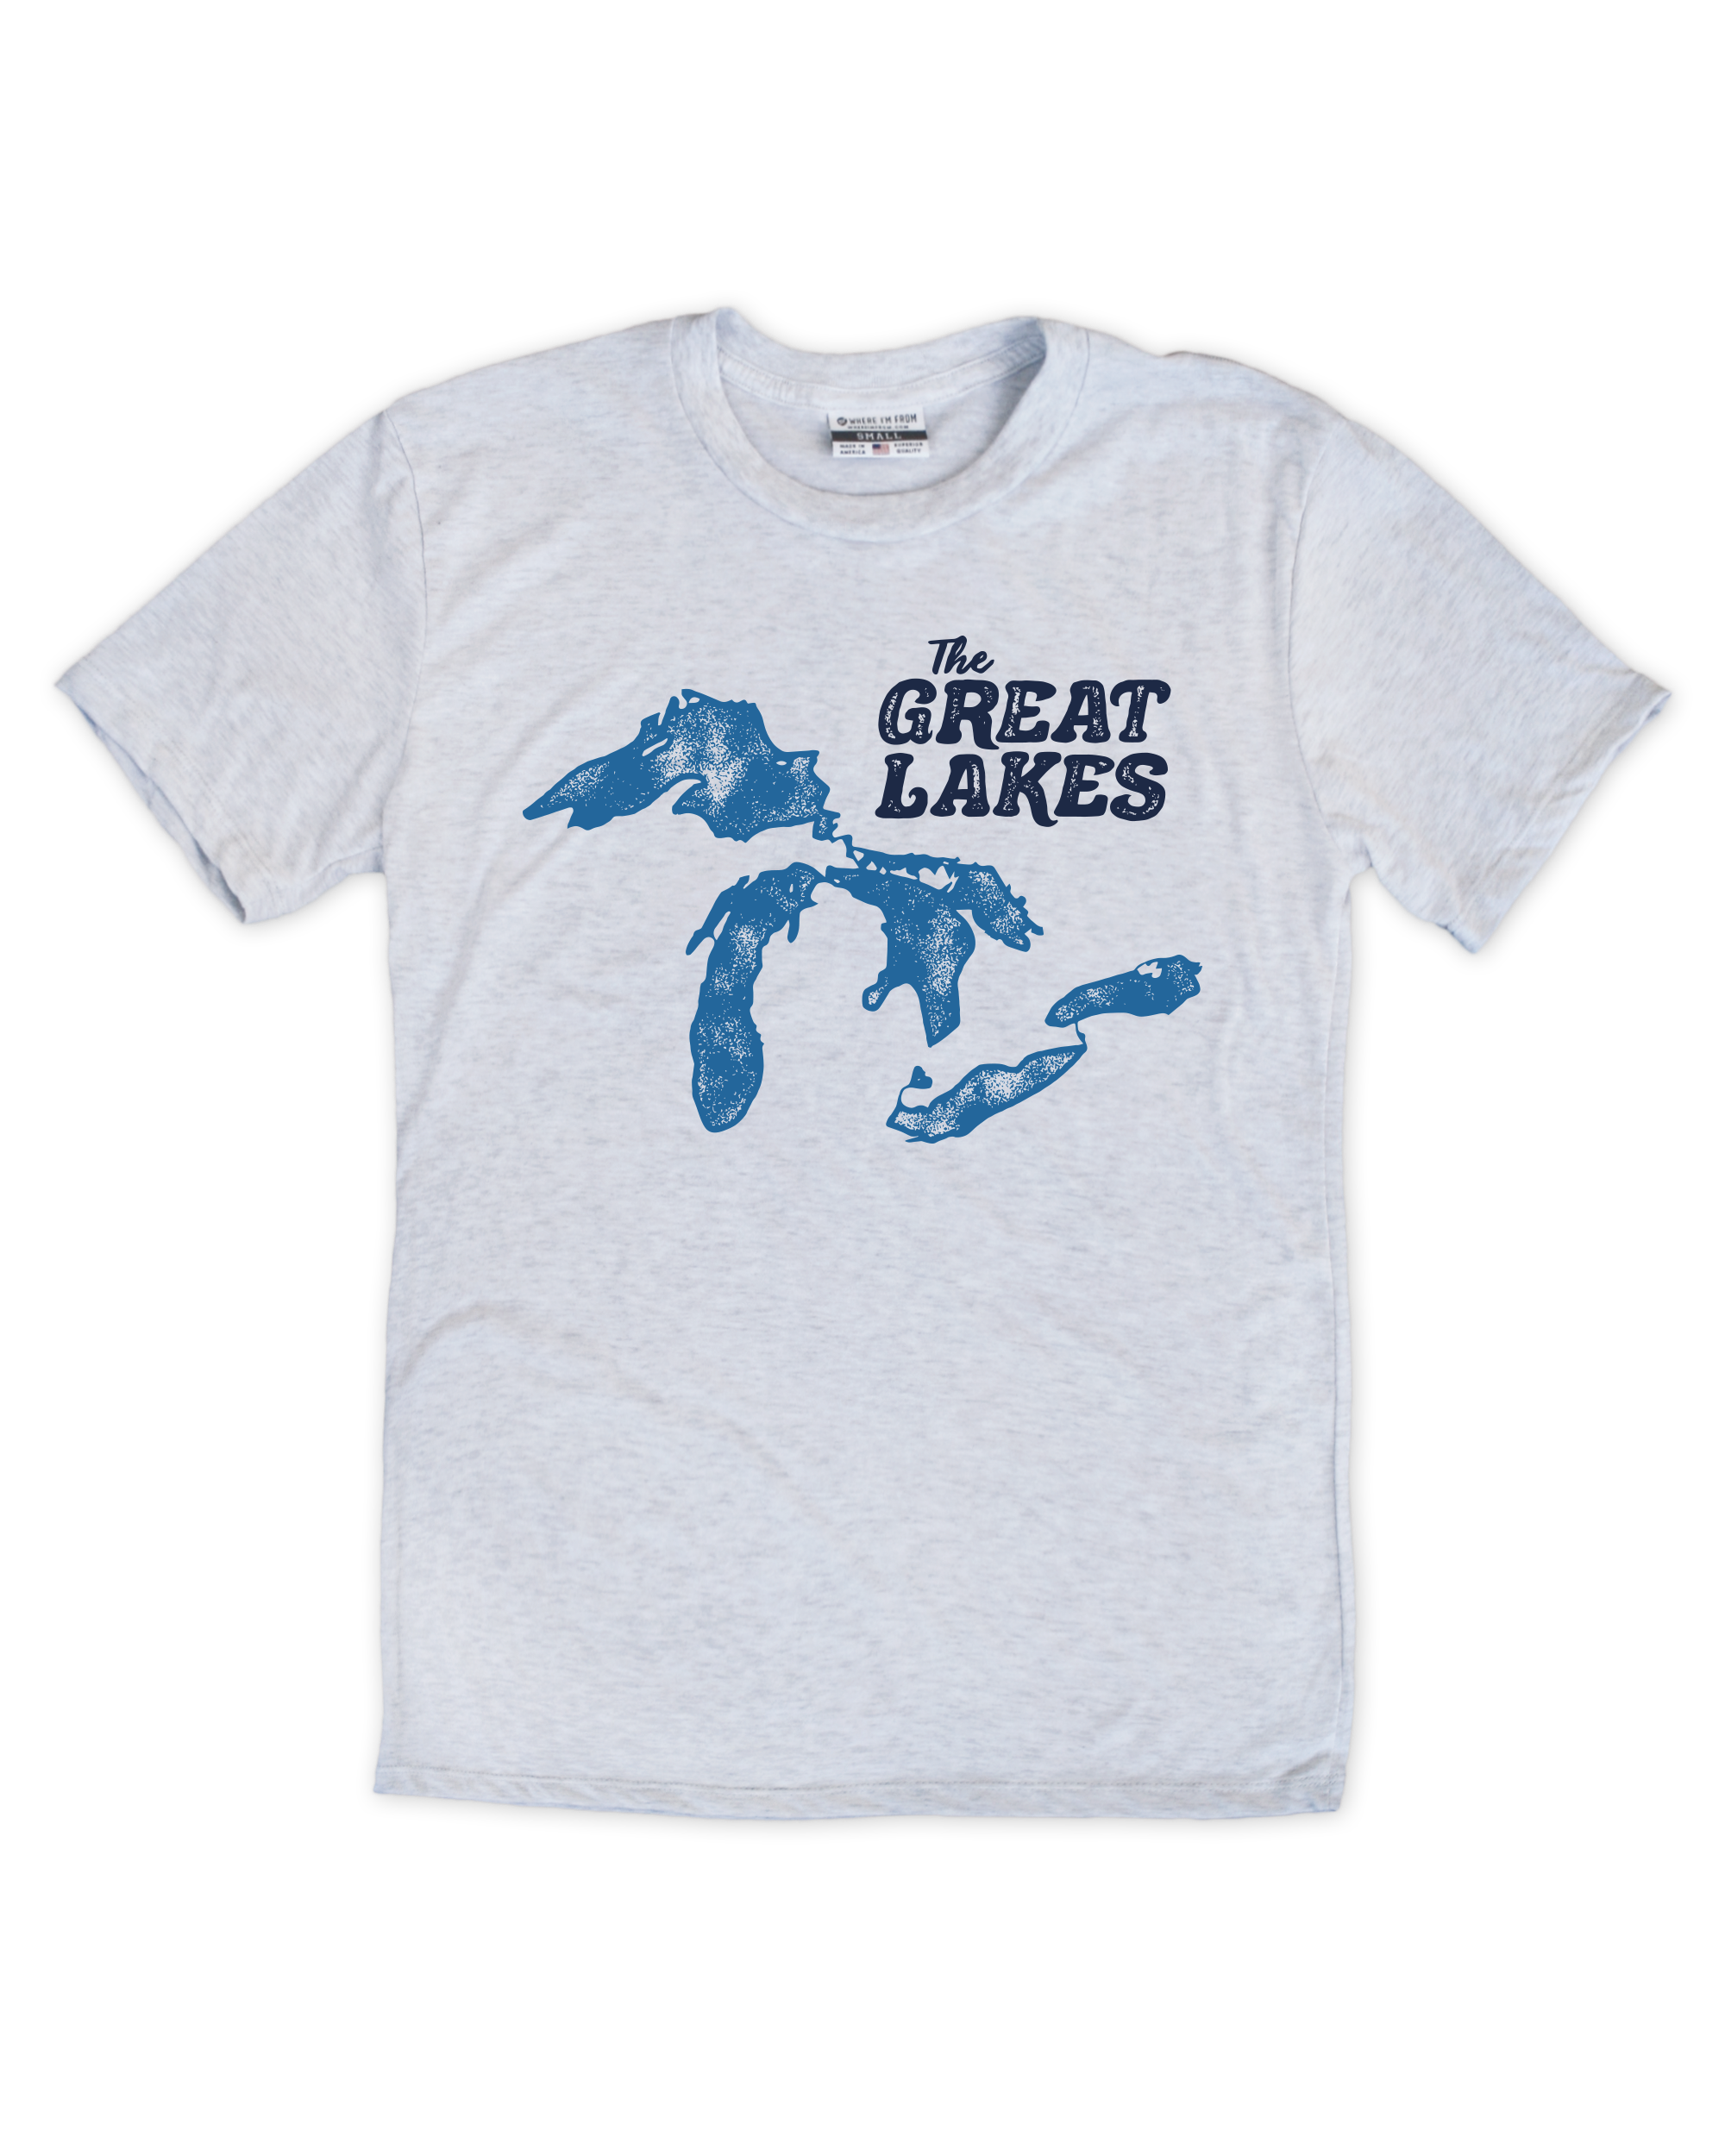 The Great Lakes Ash Crew